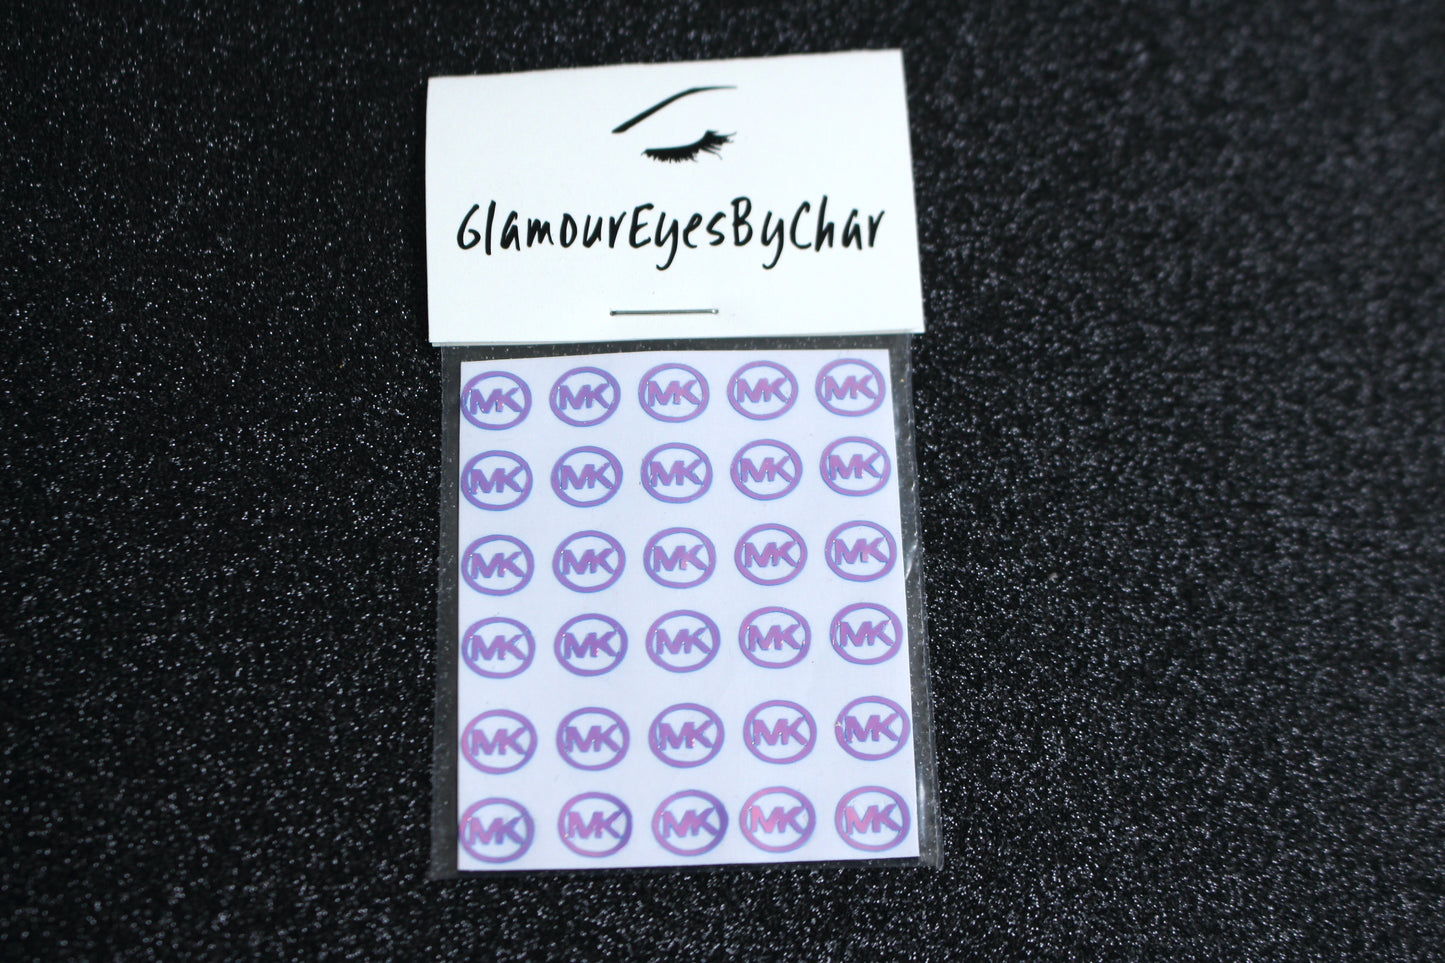 Spice up your nails with these unique MK designer inspired nail decals. They can be used on natural or acrylic nails. You can also apply them on top of regular or gel/shellac nail polish. These handmade decals can also be used for body art or any DIY project. The pack contains 30 decals and is available in 4 different colours.   Size: ﻿W= 0.323 inches, H= 0.297 inches  Tip: Apply some of our glitter on your nails to really GLAMOUREYES your look.  